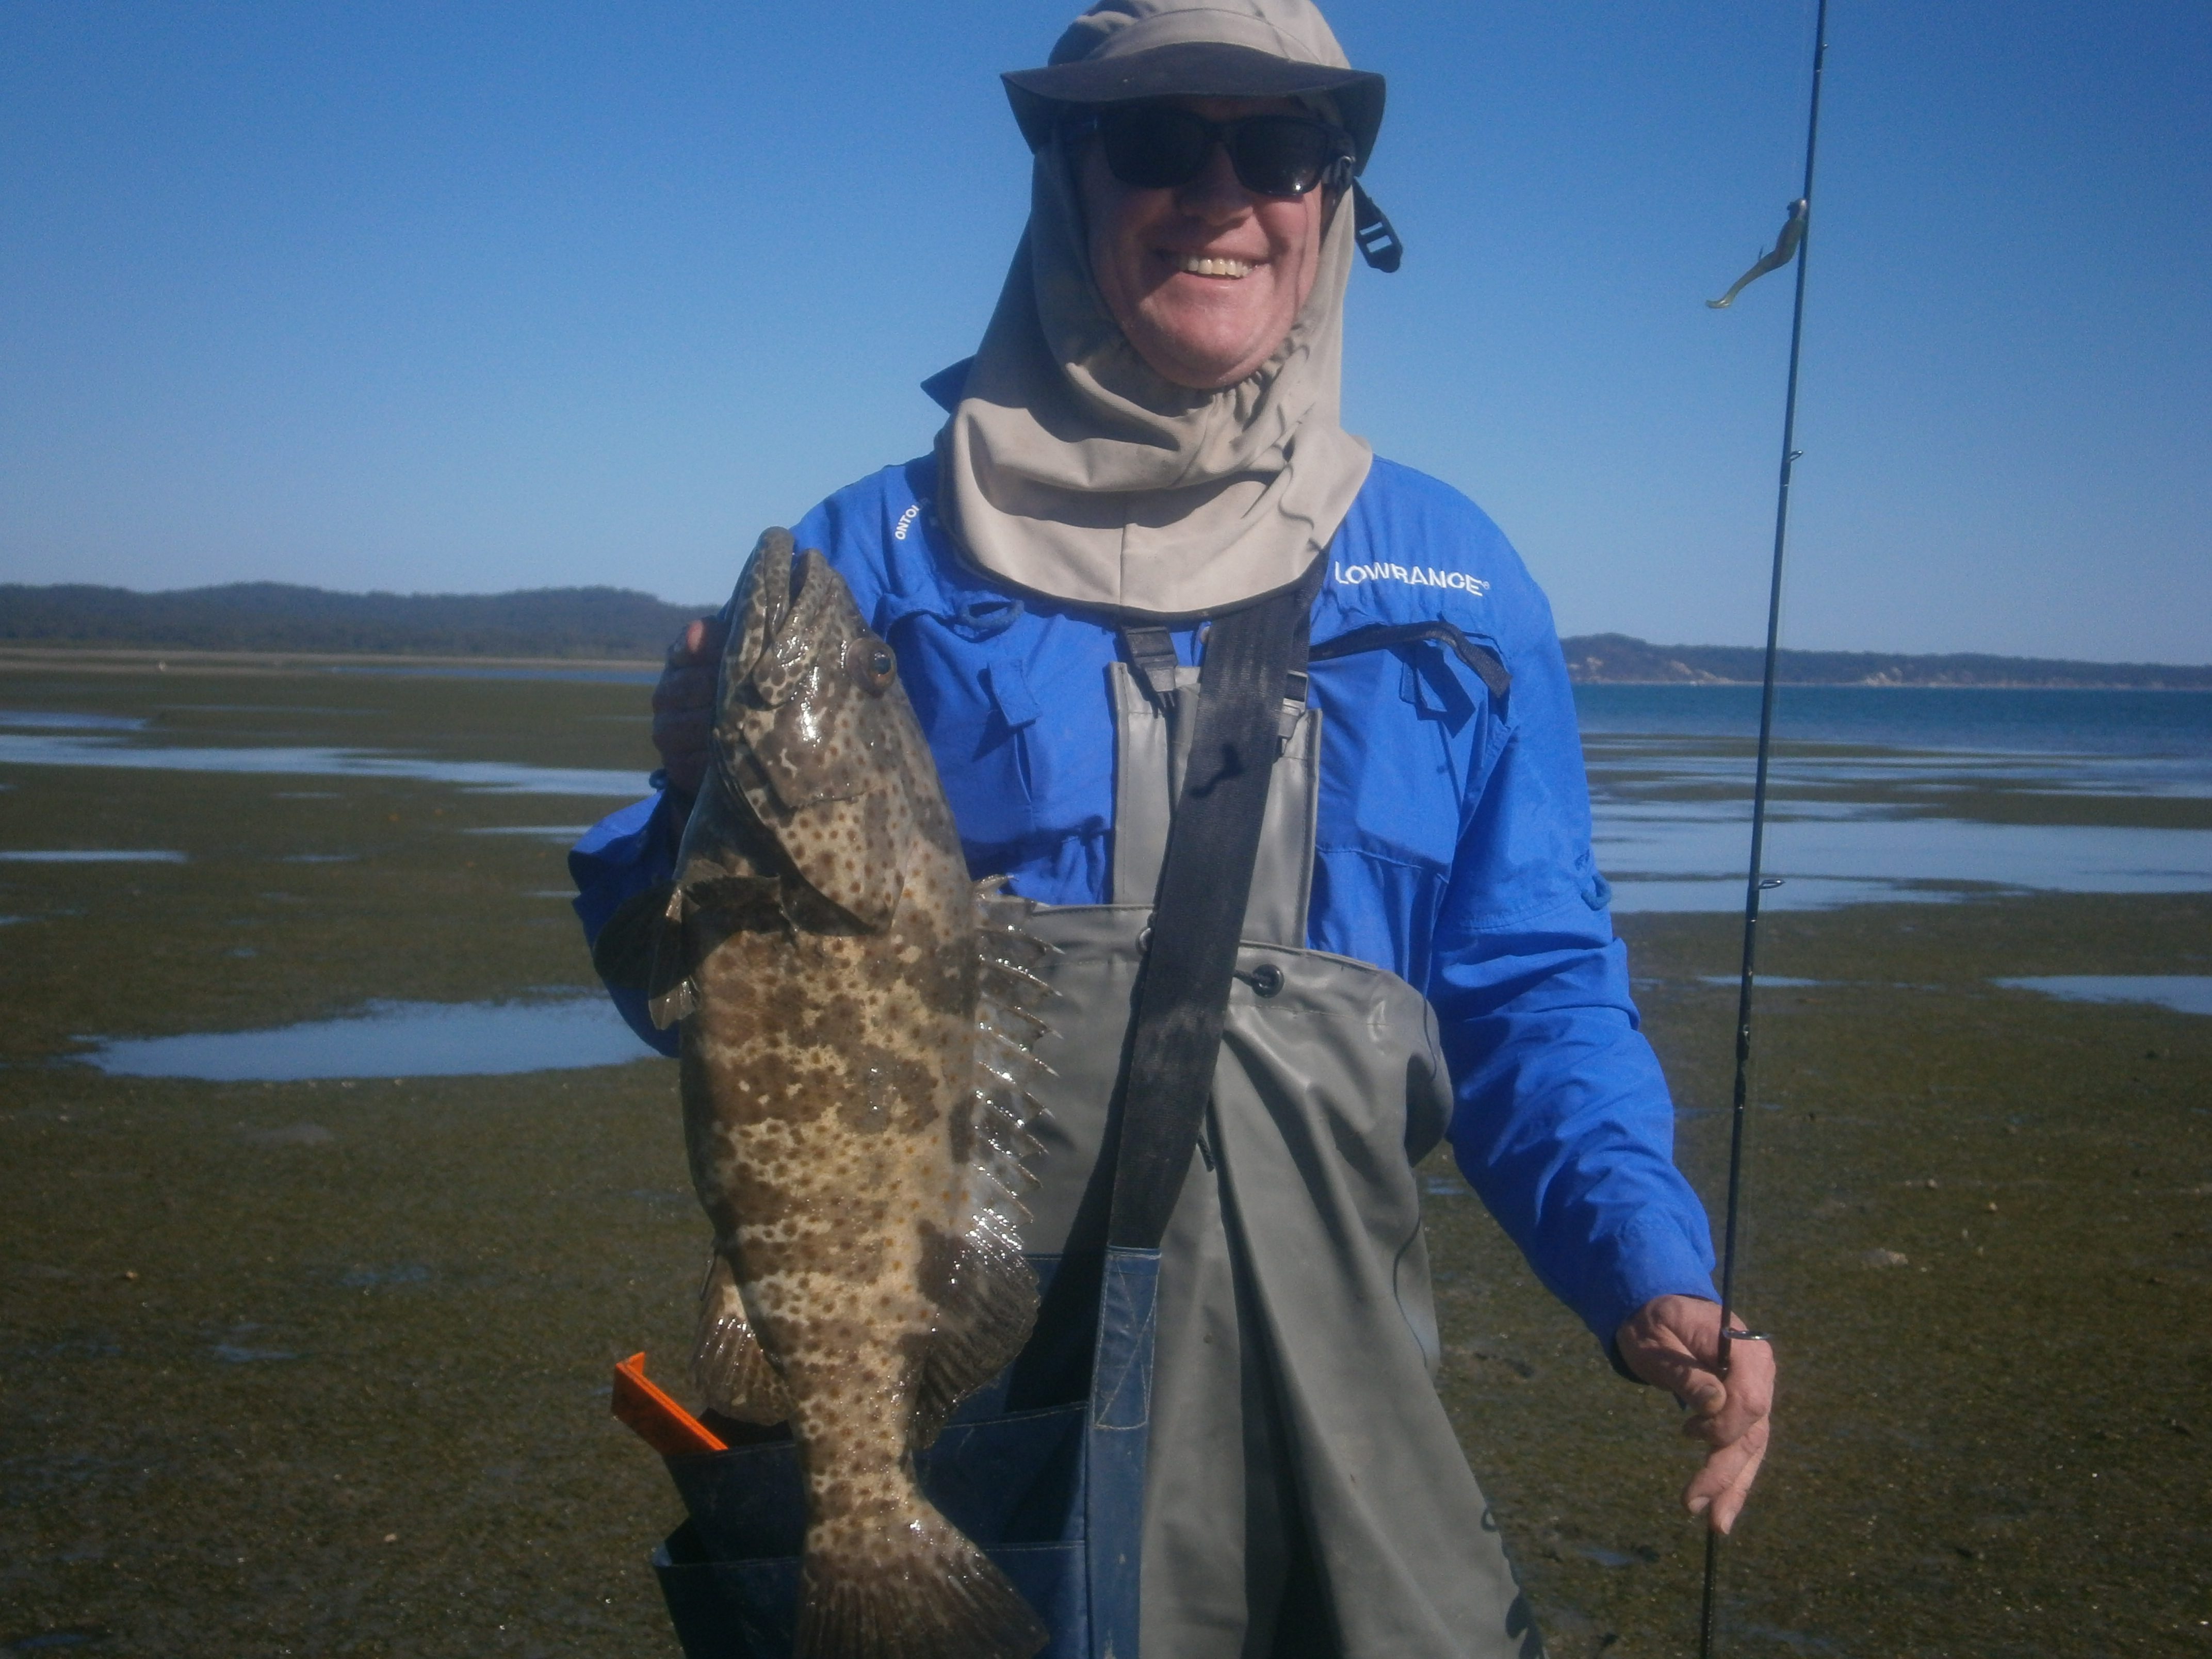 Rossco with a 61cm estuary cod, which is a great catch on light gear from the flats.